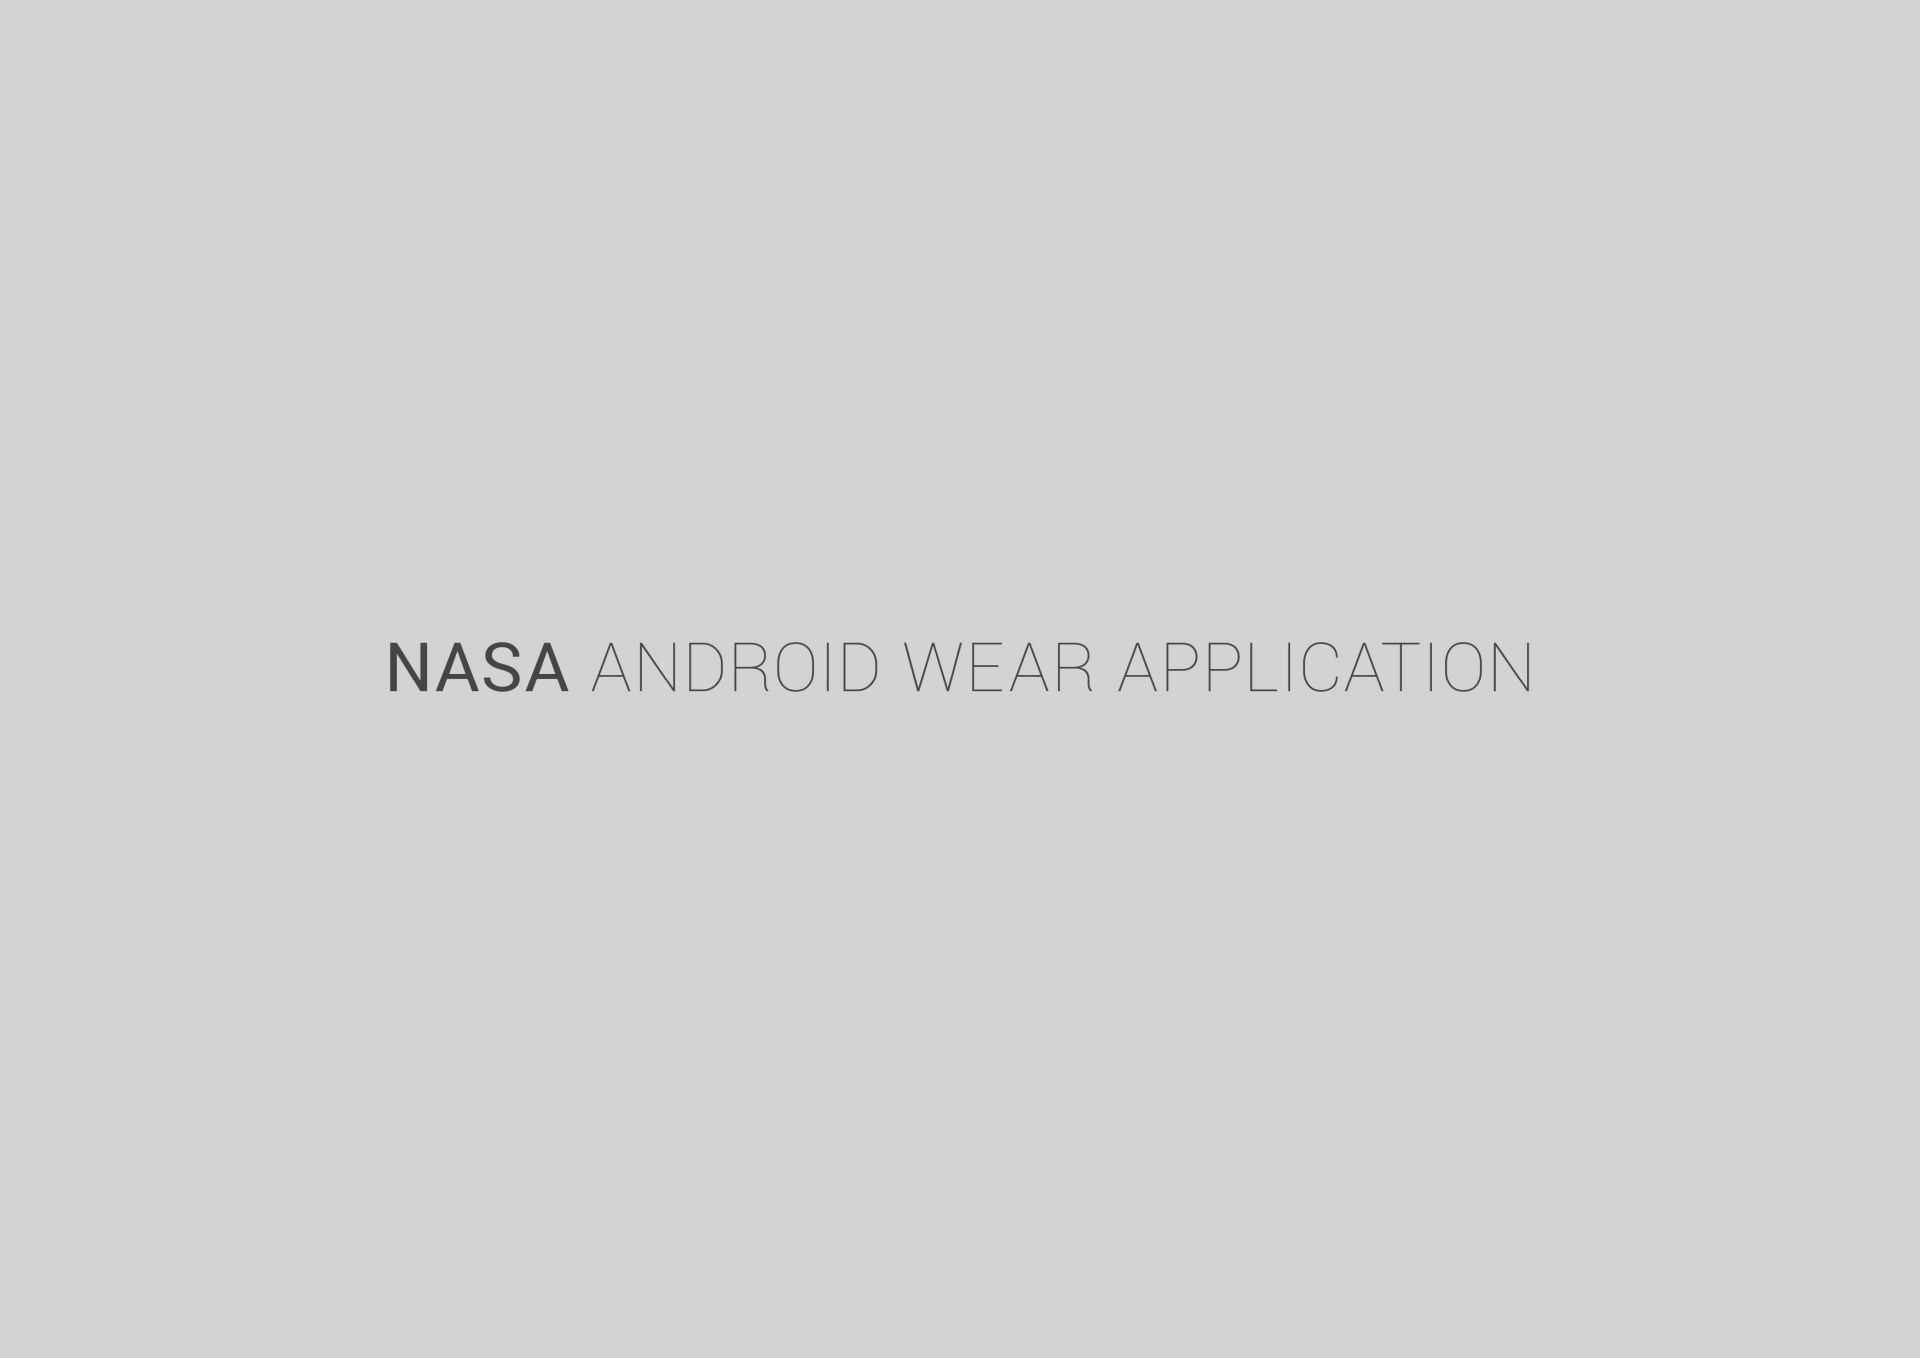 NASA android wear application title